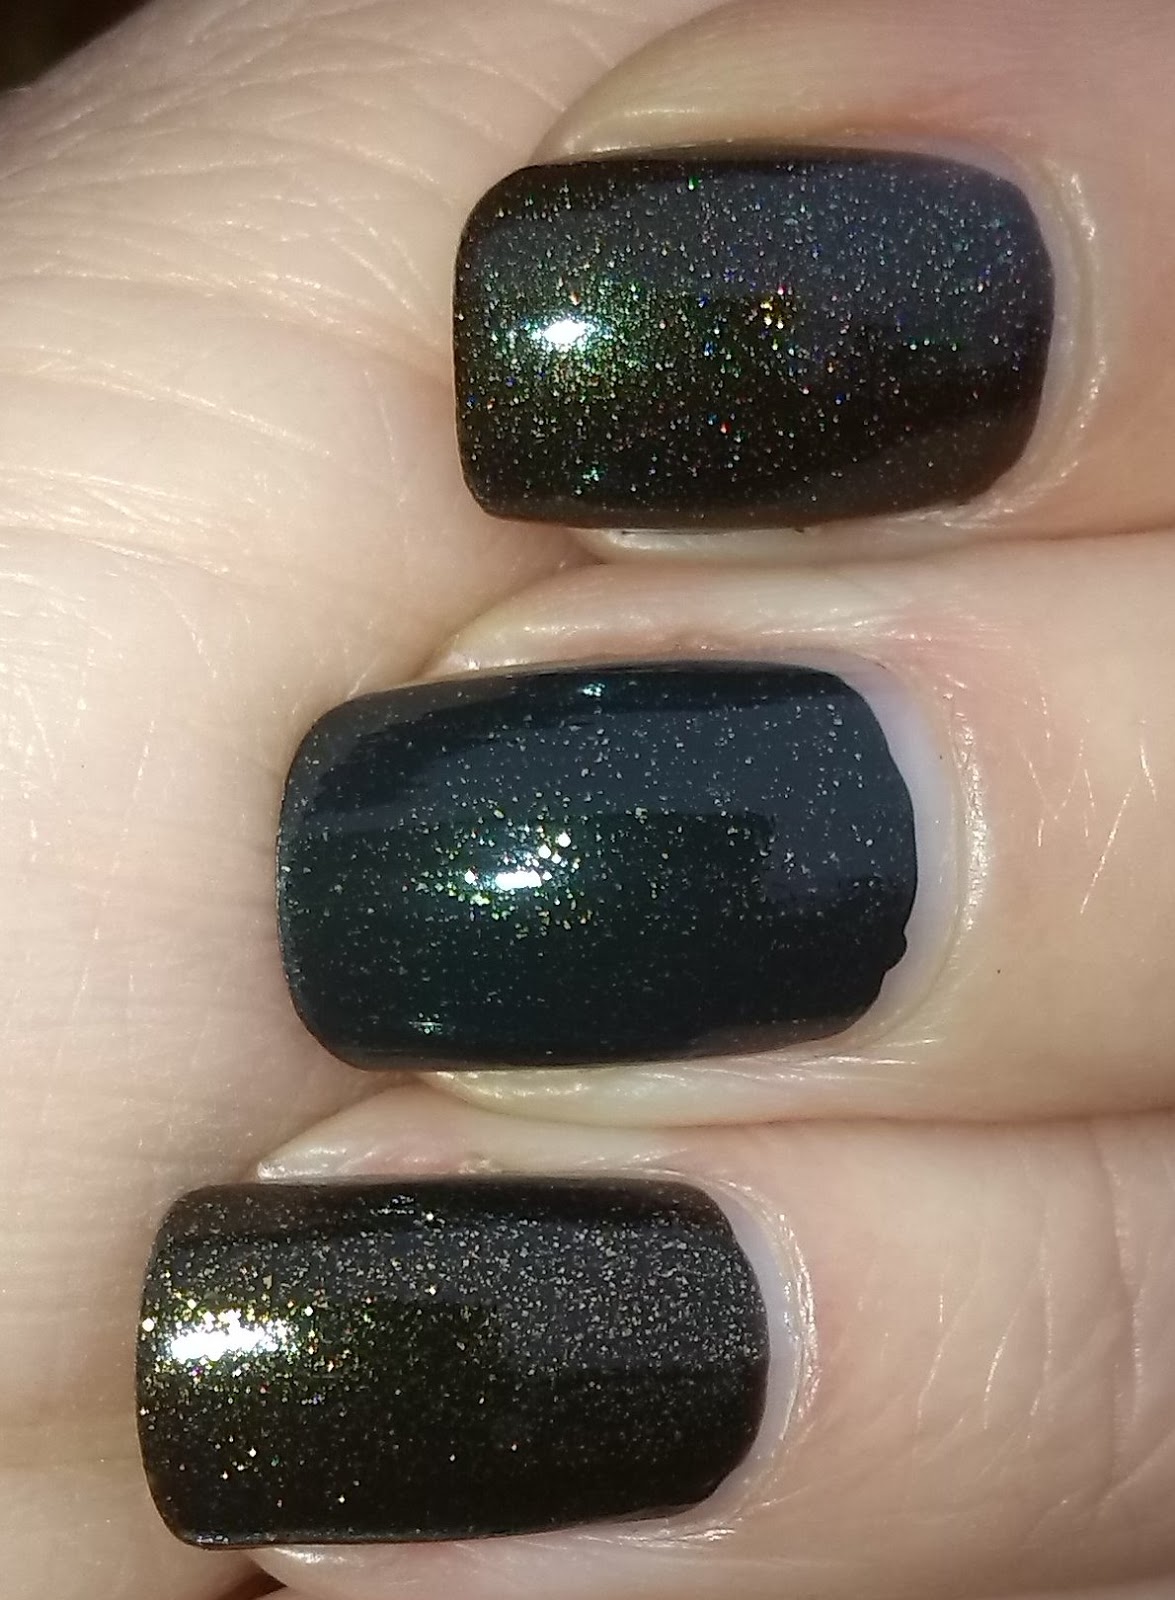 ATC Slitheen,  OPI Live and Let Die,  AE Beauty Never Fails